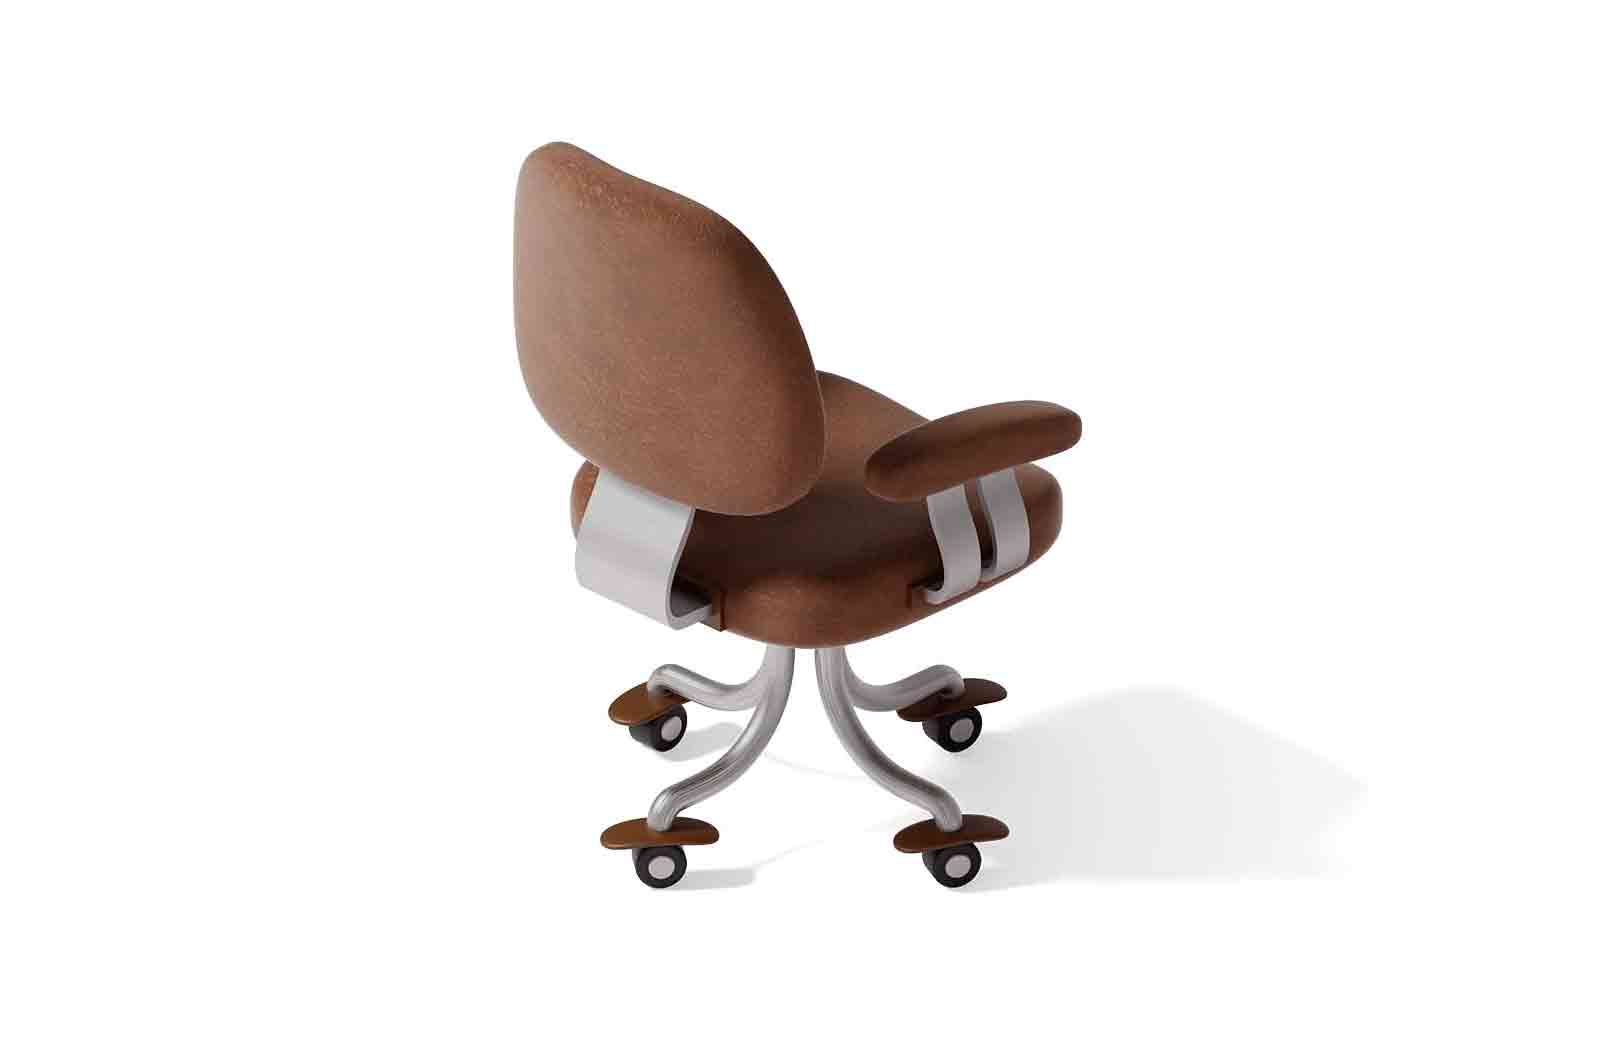 Modern brown office chair 3d rendered illustration. Isometric armchair model with metal base on wheels. Office furniture concept